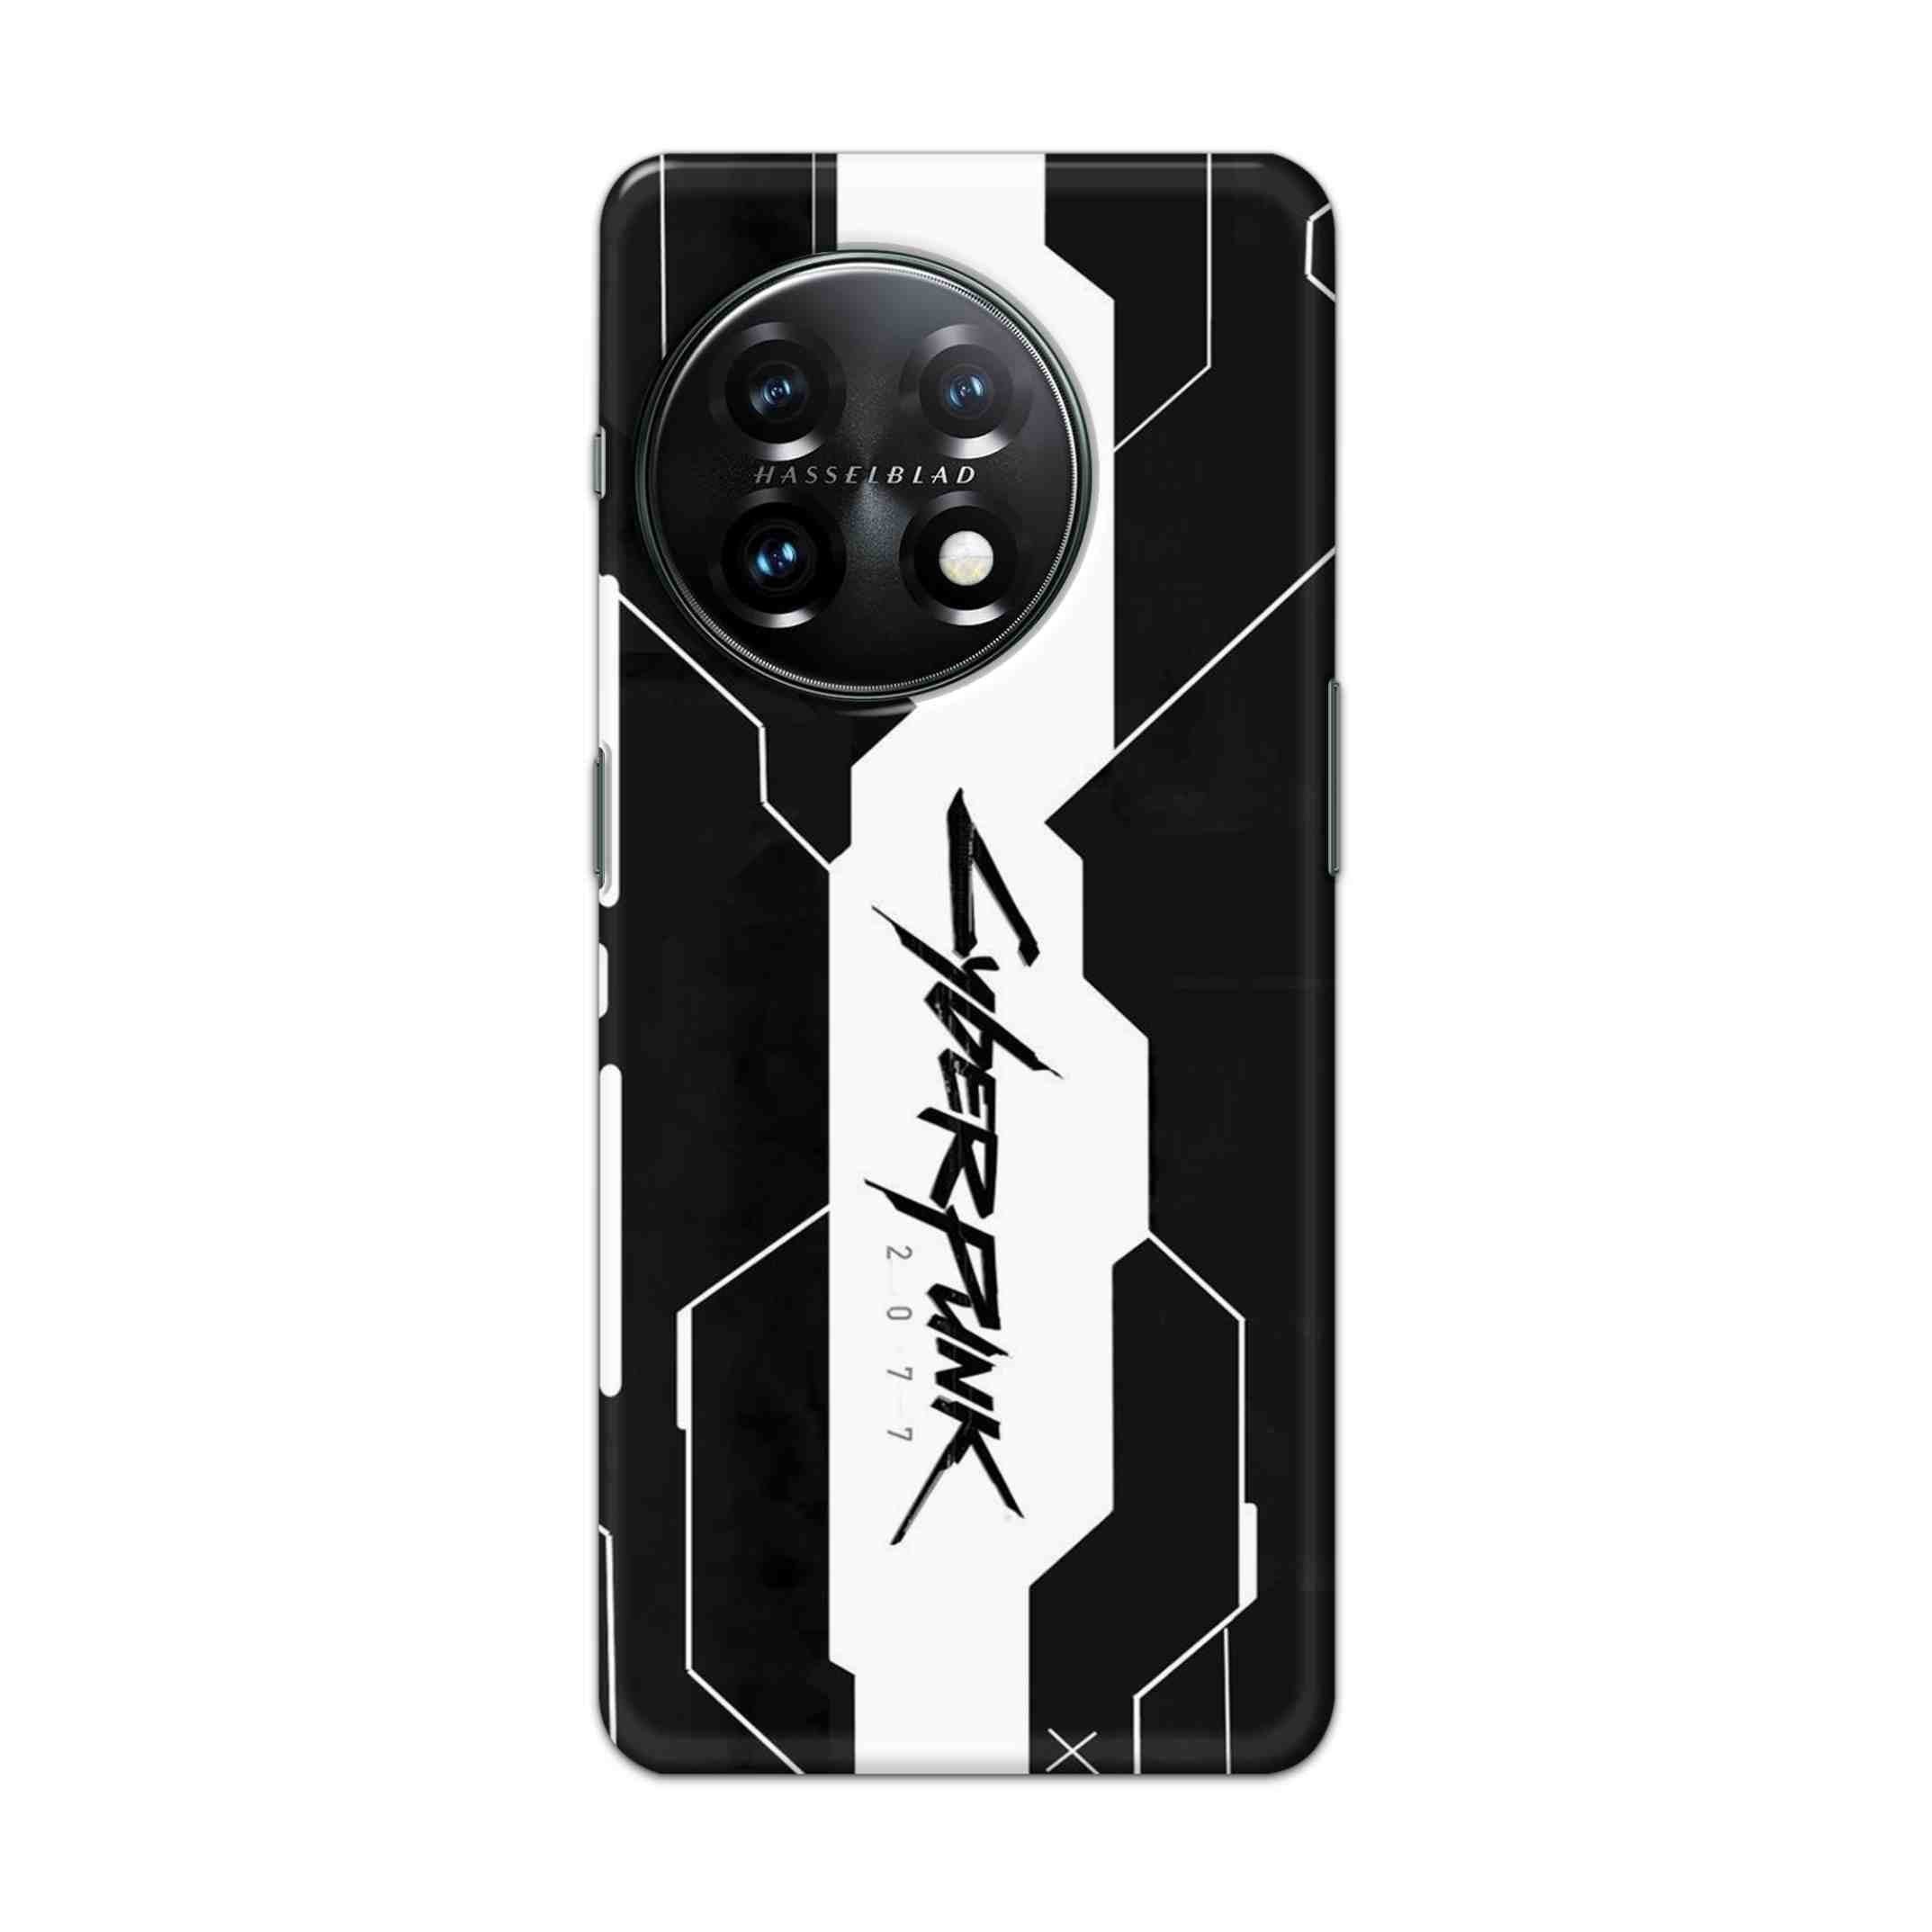 Buy Cyberpunk 2077 Art Hard Back Mobile Phone Case Cover For Oneplus 11 5G Online